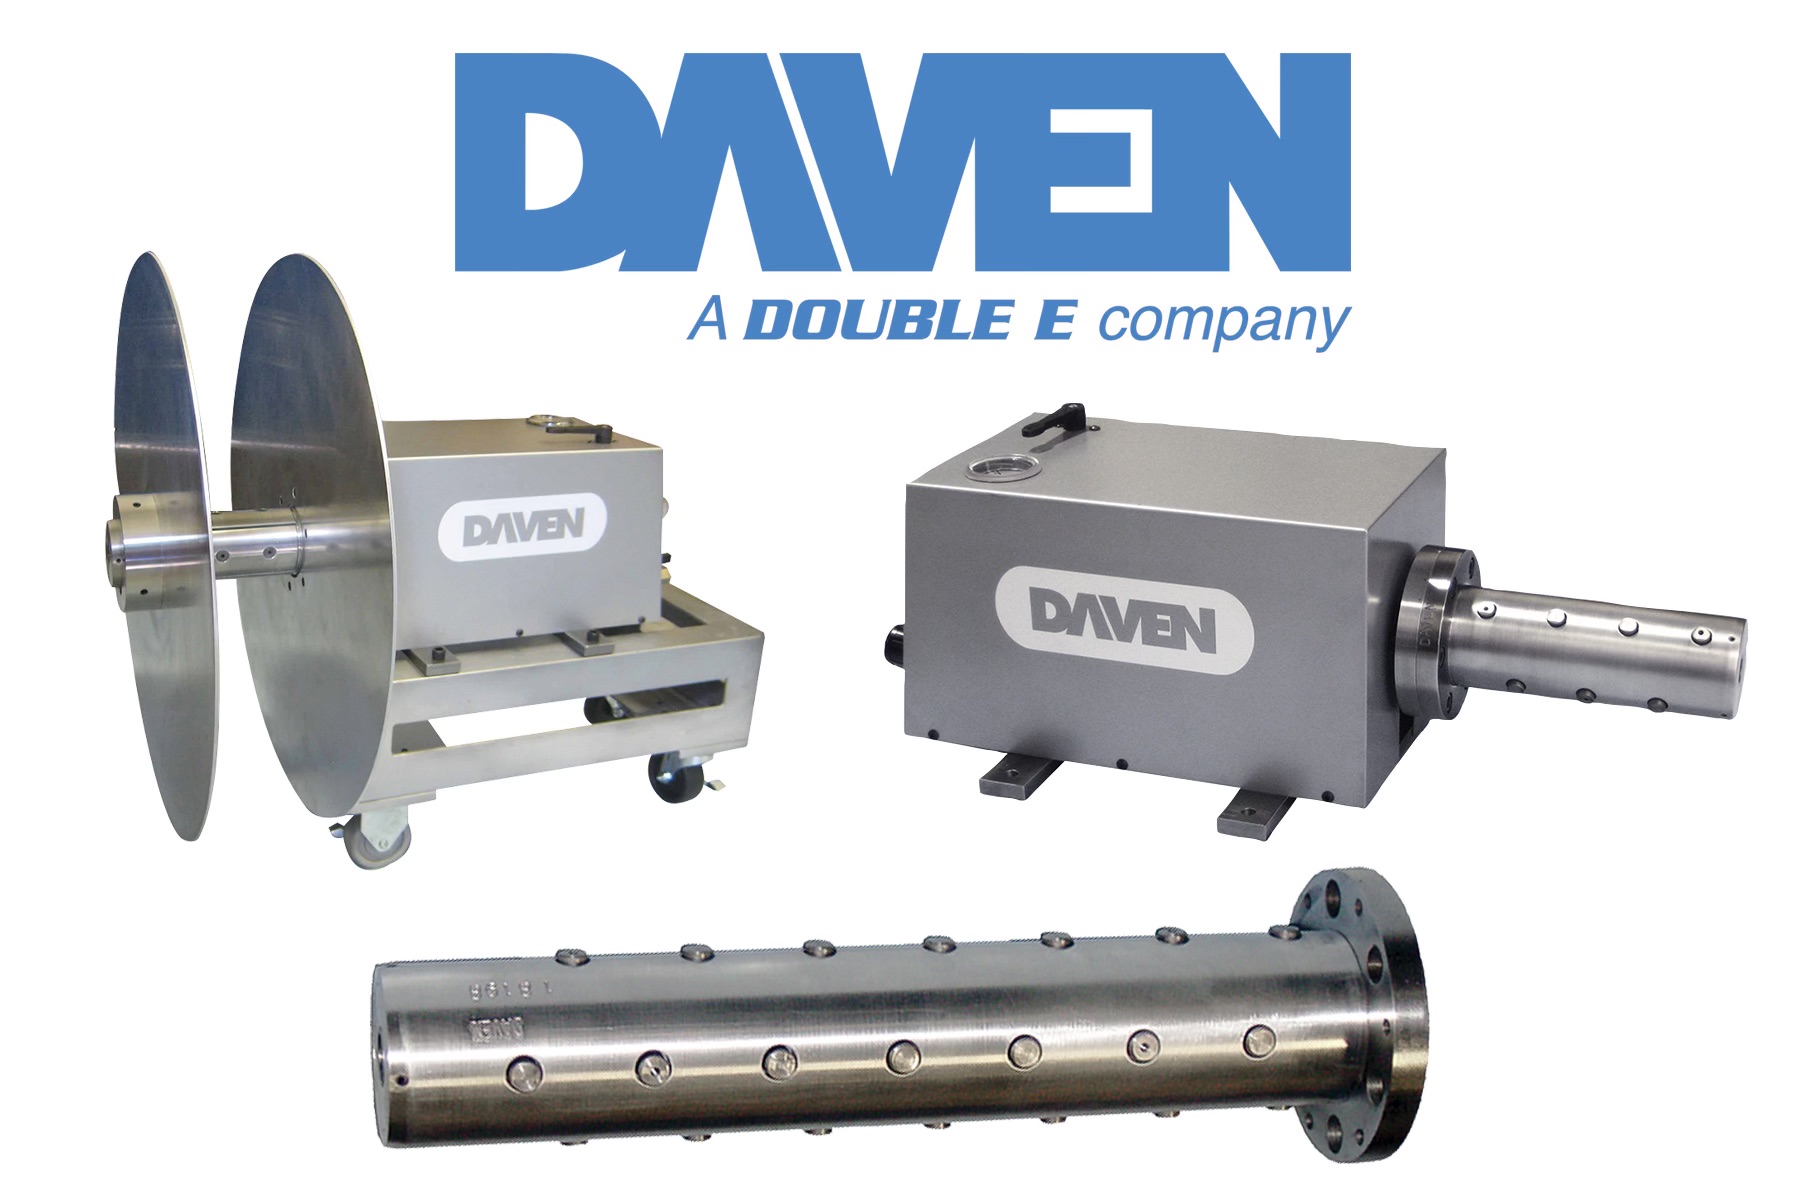 Daven logo and products